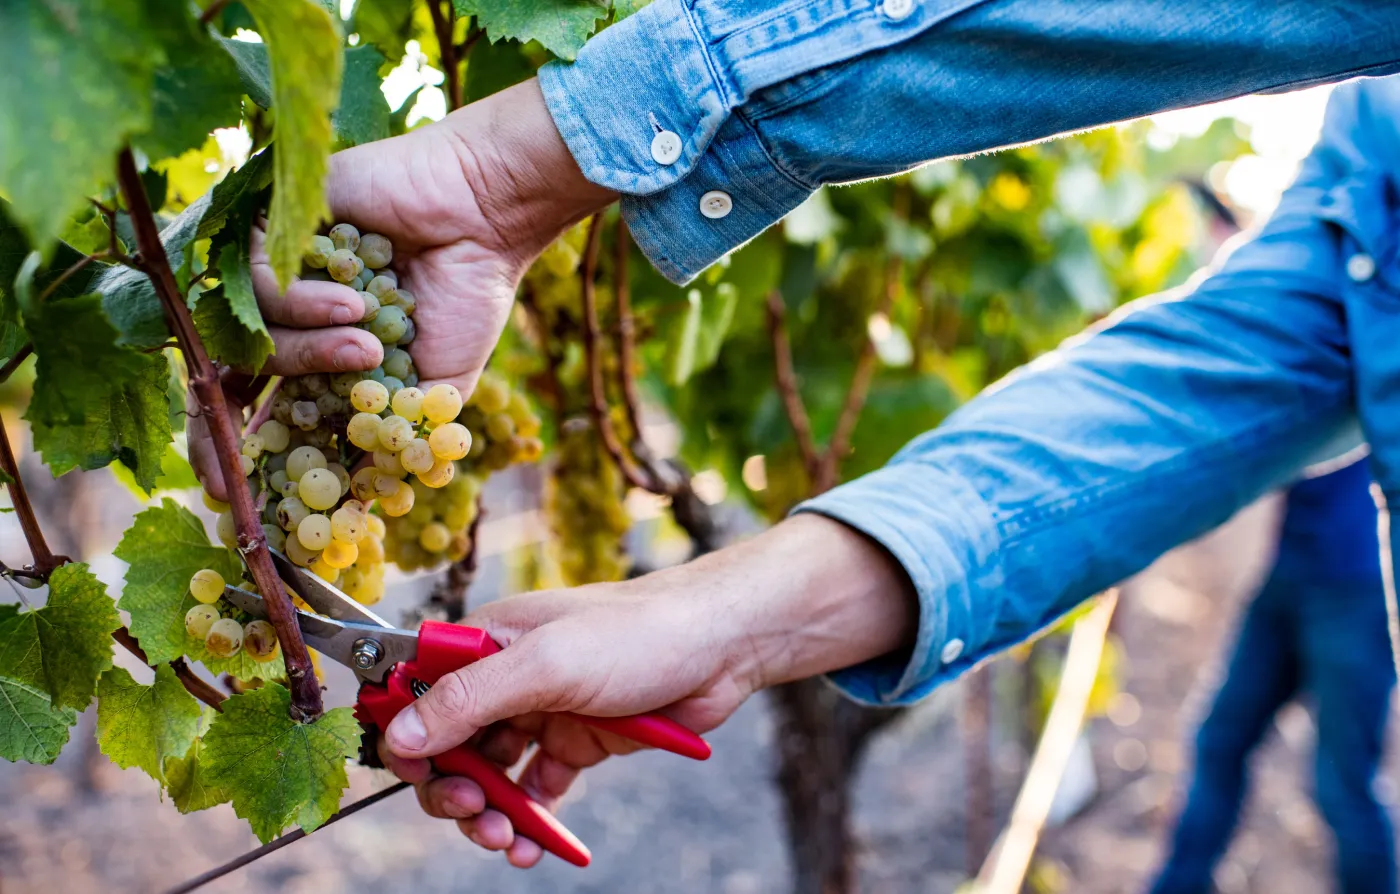 Hands cutting grapes from the vine